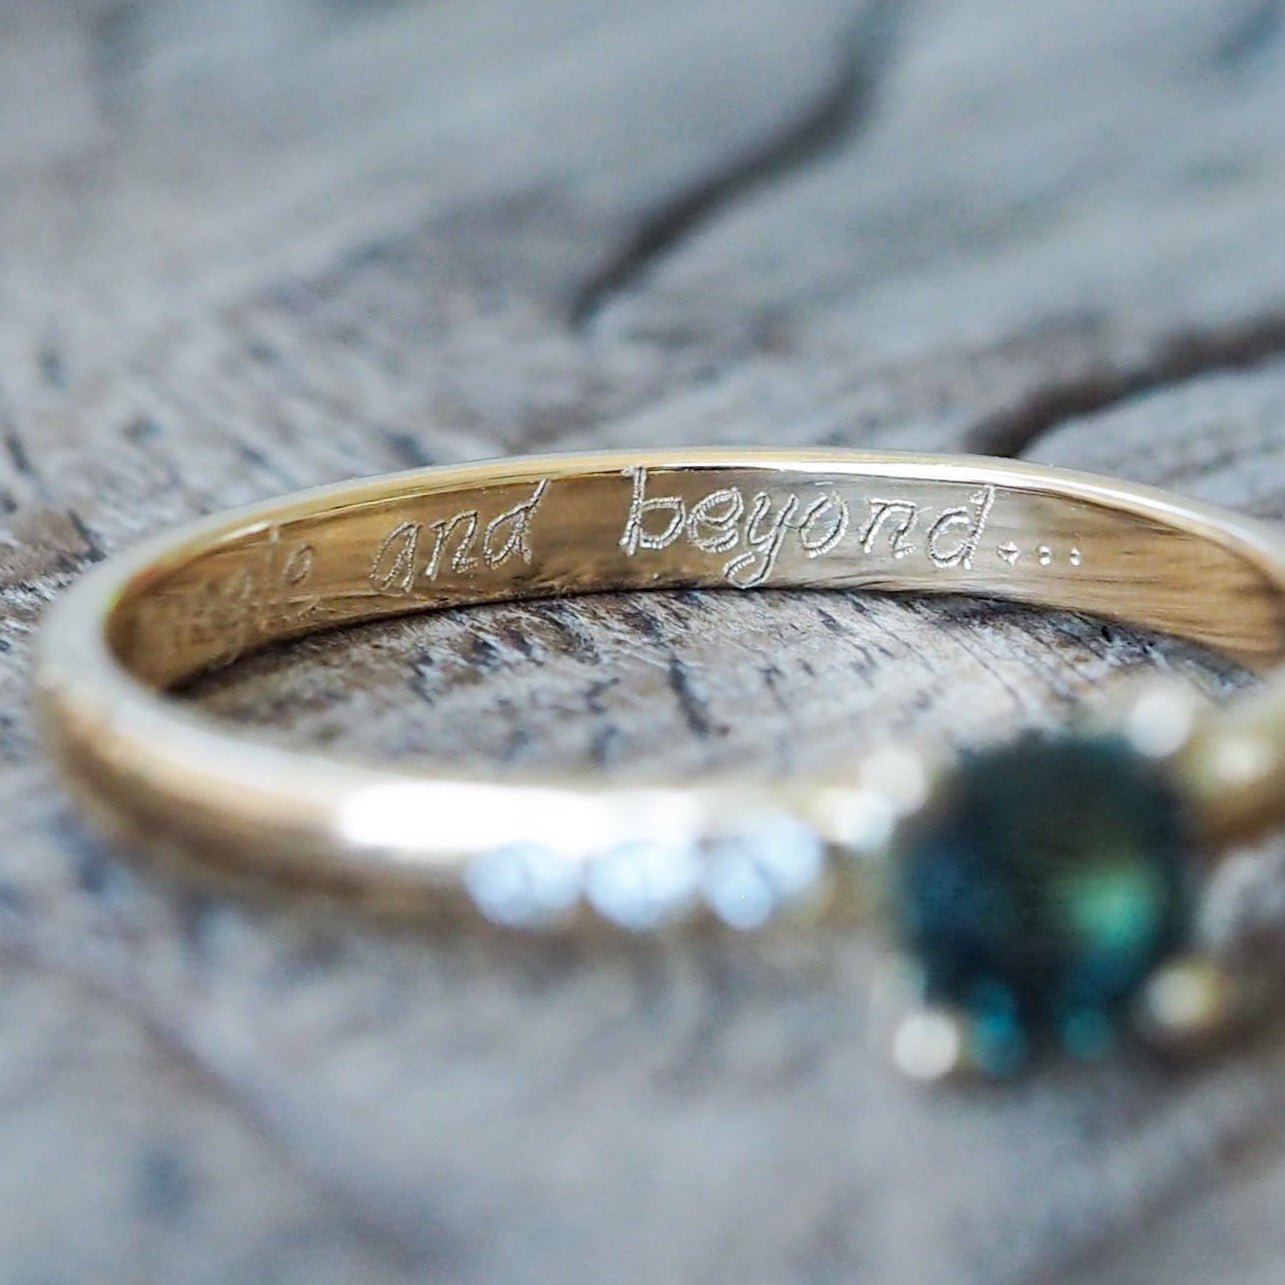 Ring Engraving - Handwritten Inscription - Gardens of the Sun | Ethical Jewelry